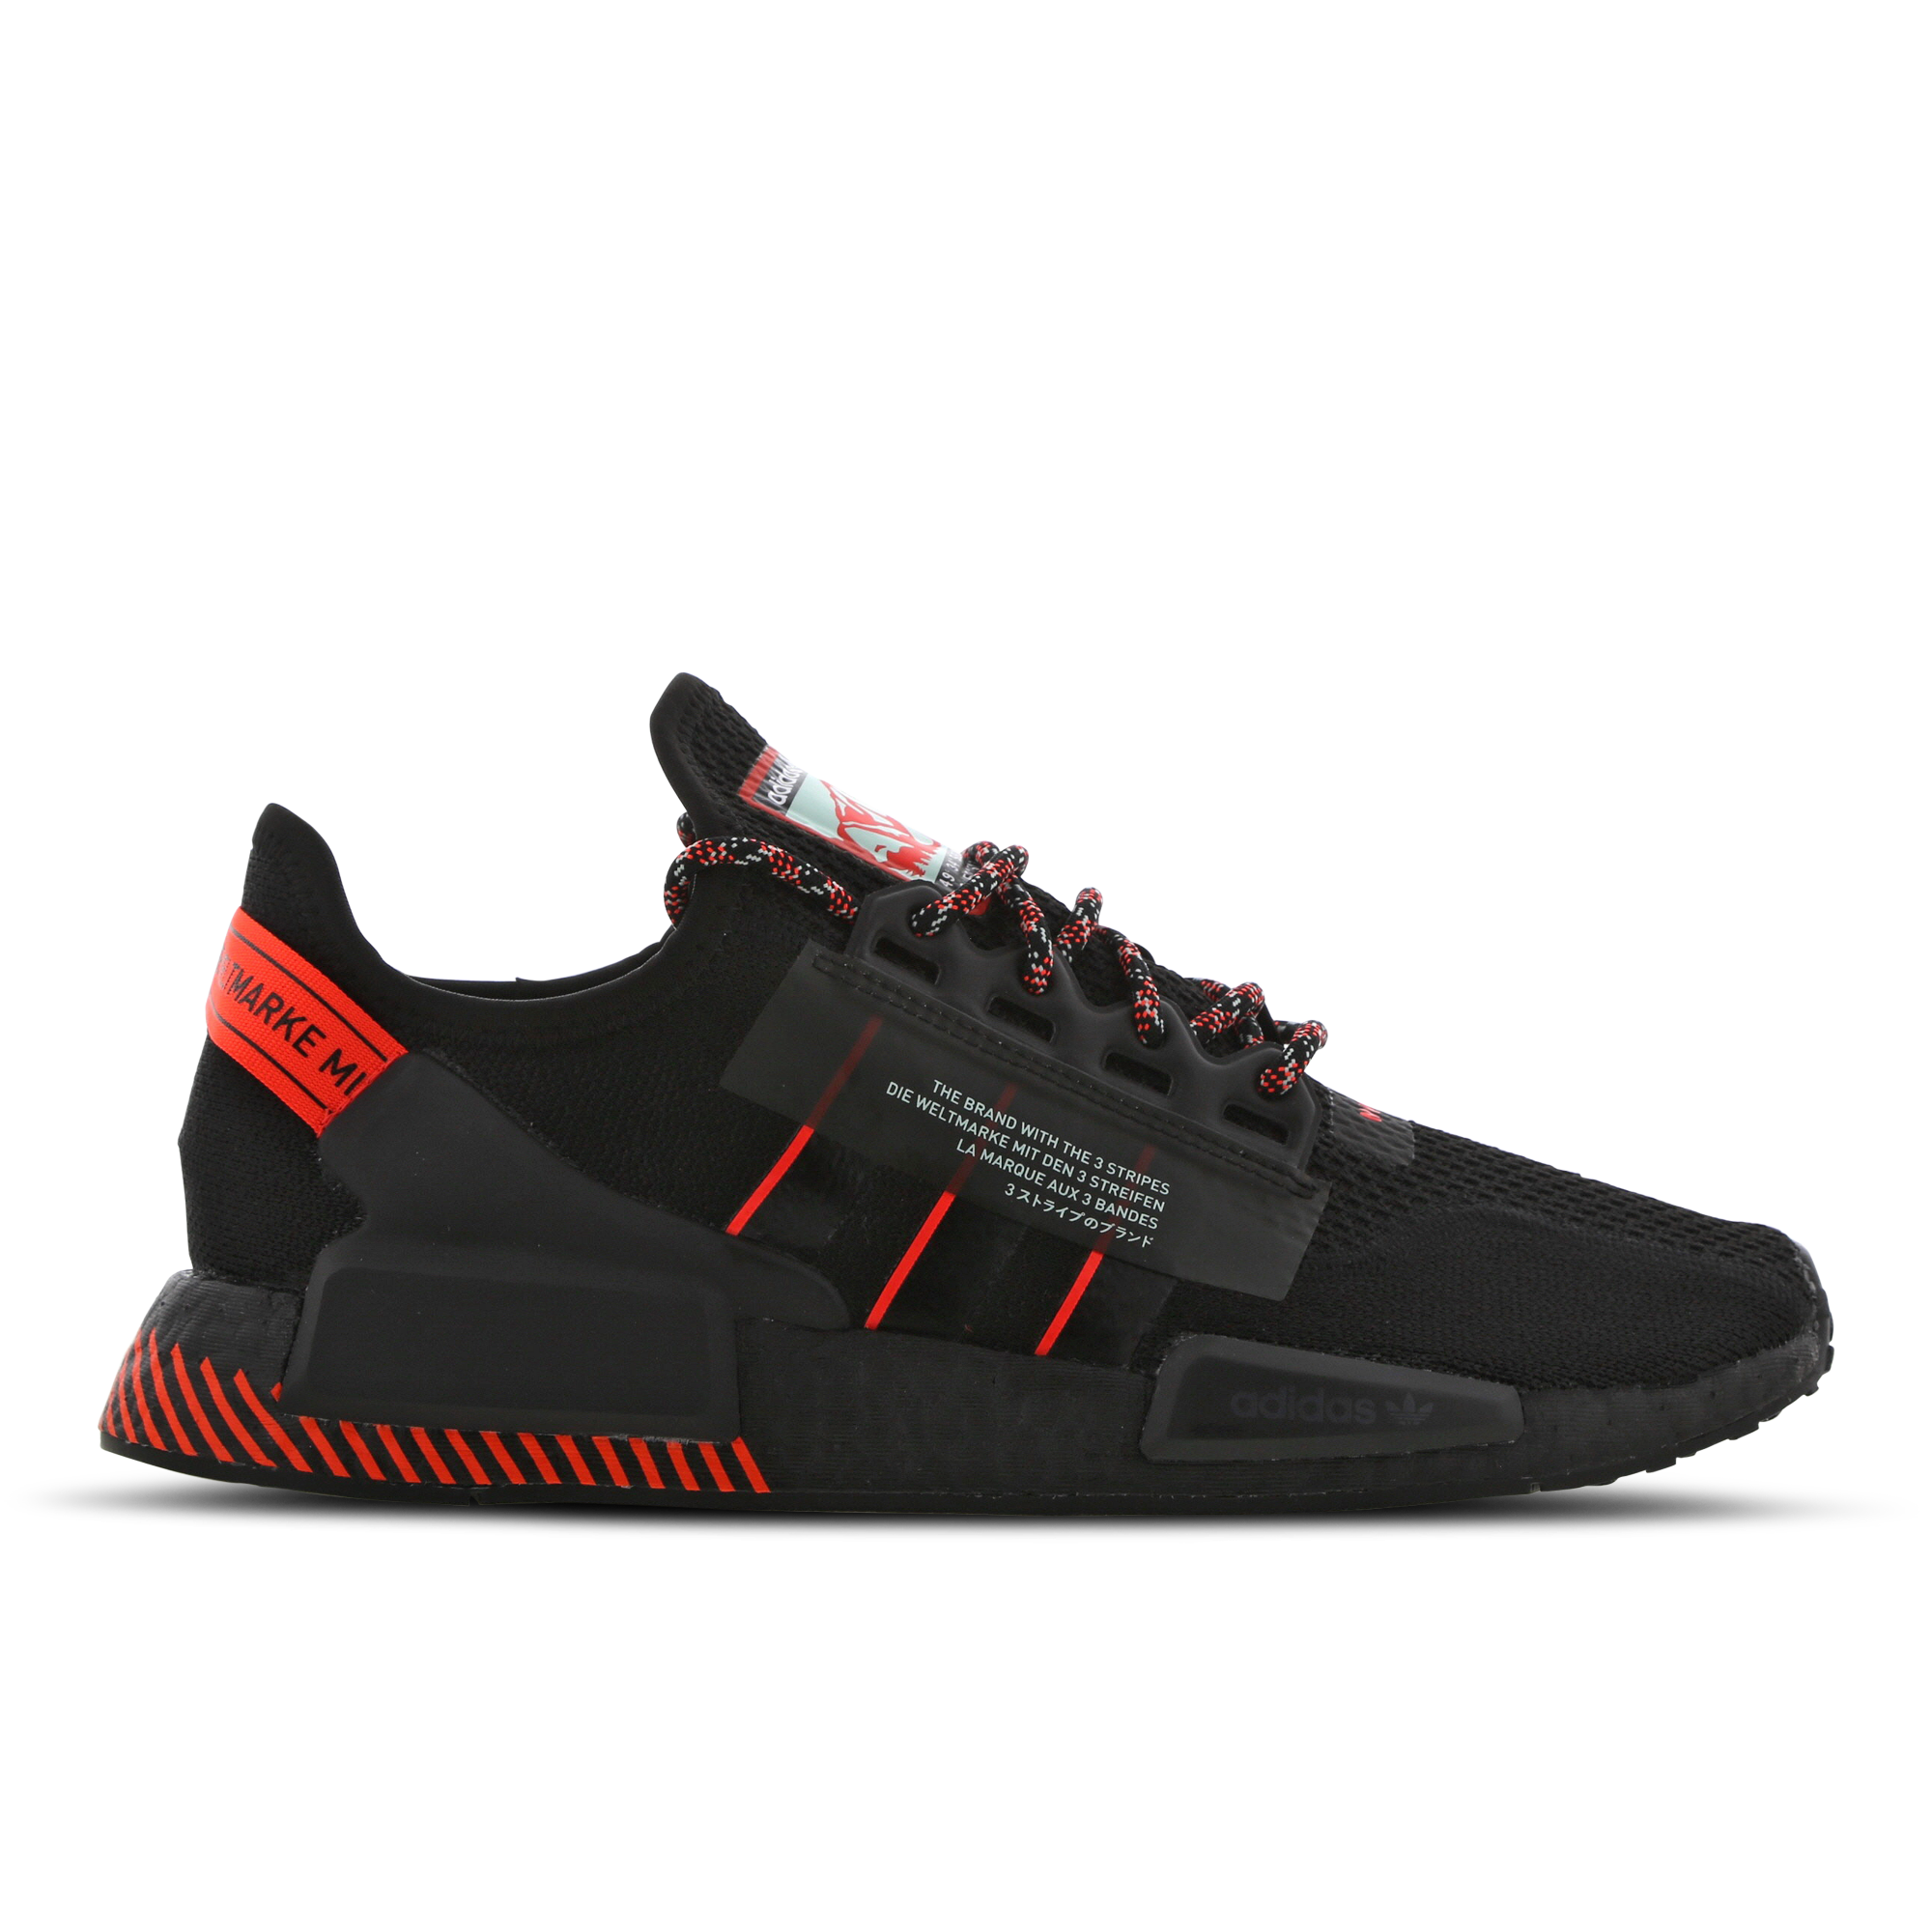 Adidas NMD R1 Red Background Group Purchase and PTT Recommendation 2020